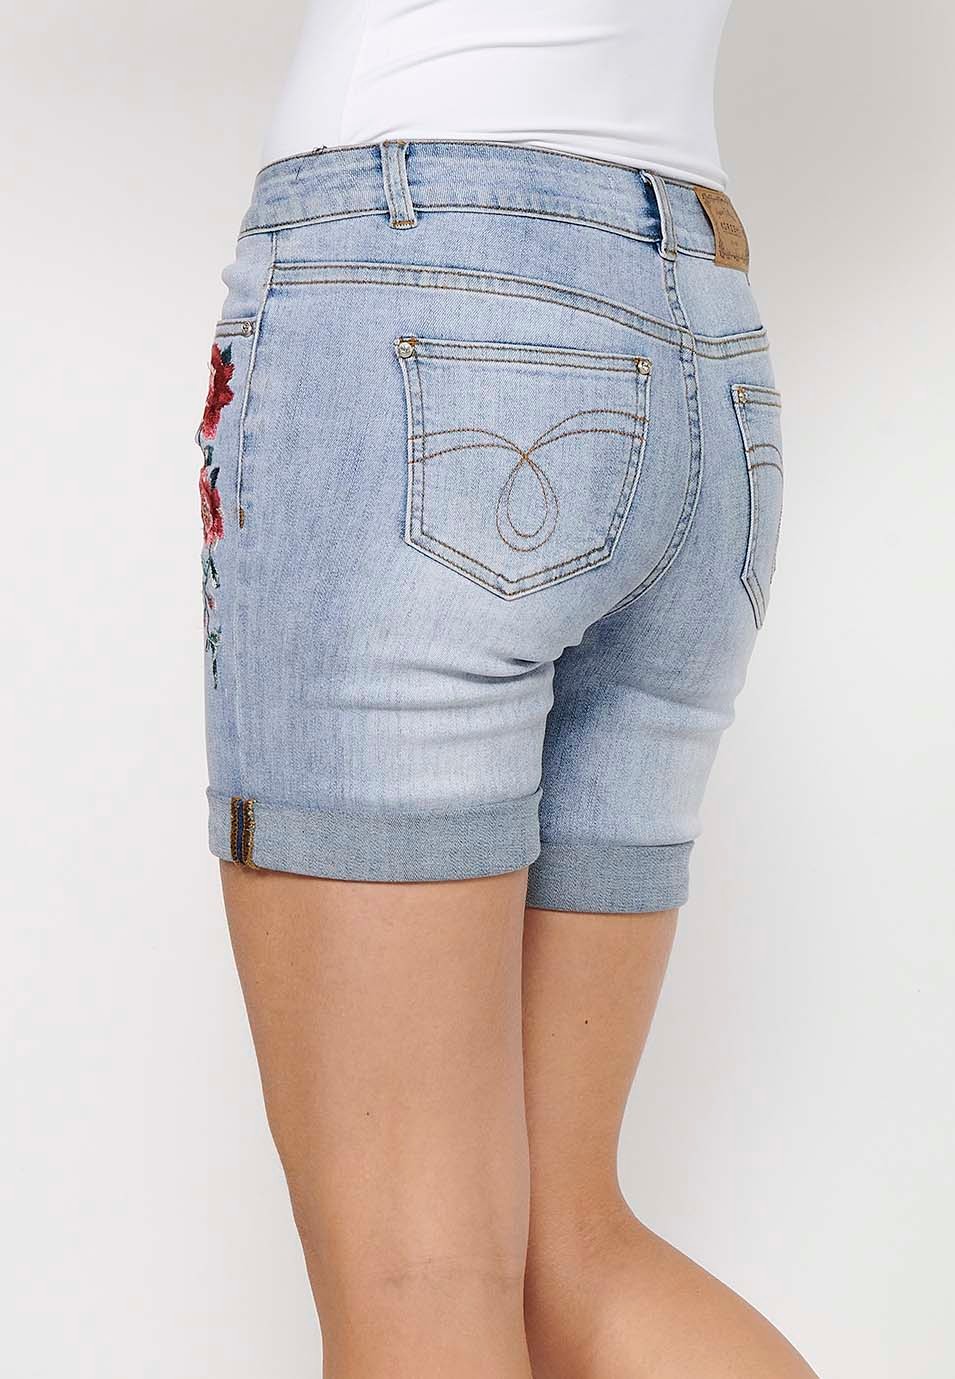 Denim shorts with front zipper and button closure and front floral embroidered details with five pockets, one blue pocket pocket for women 7